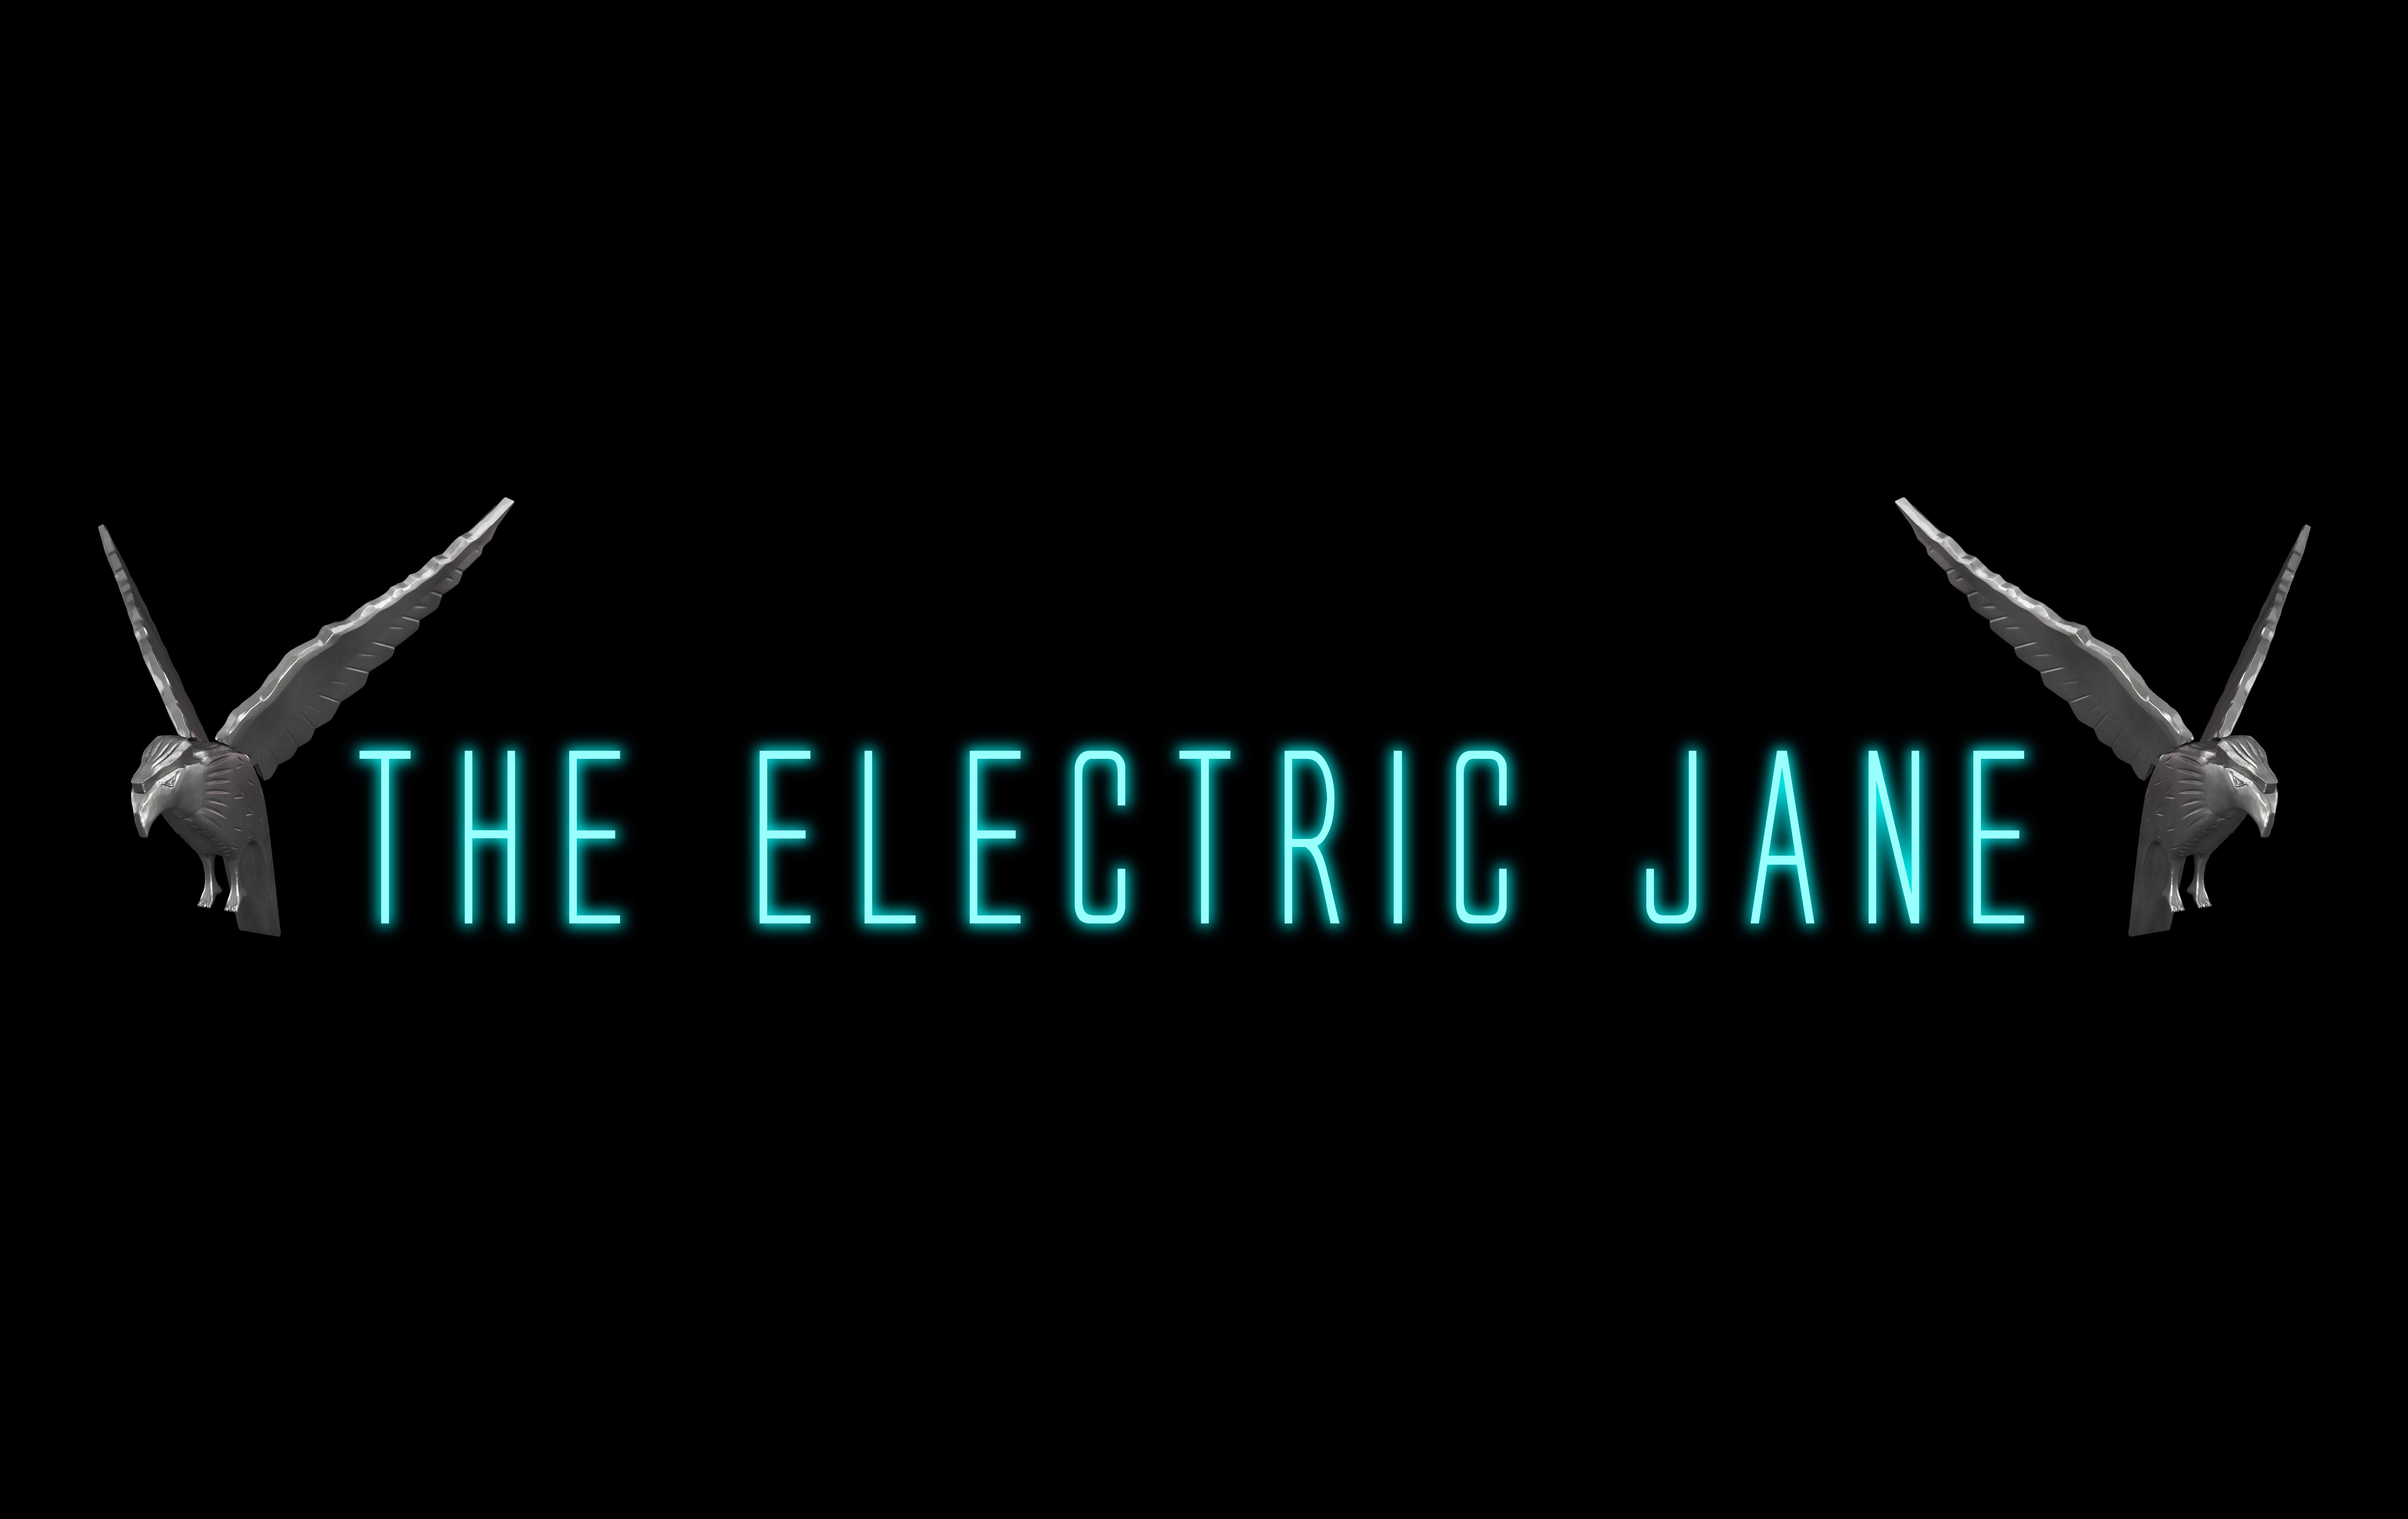 The Electric Jane